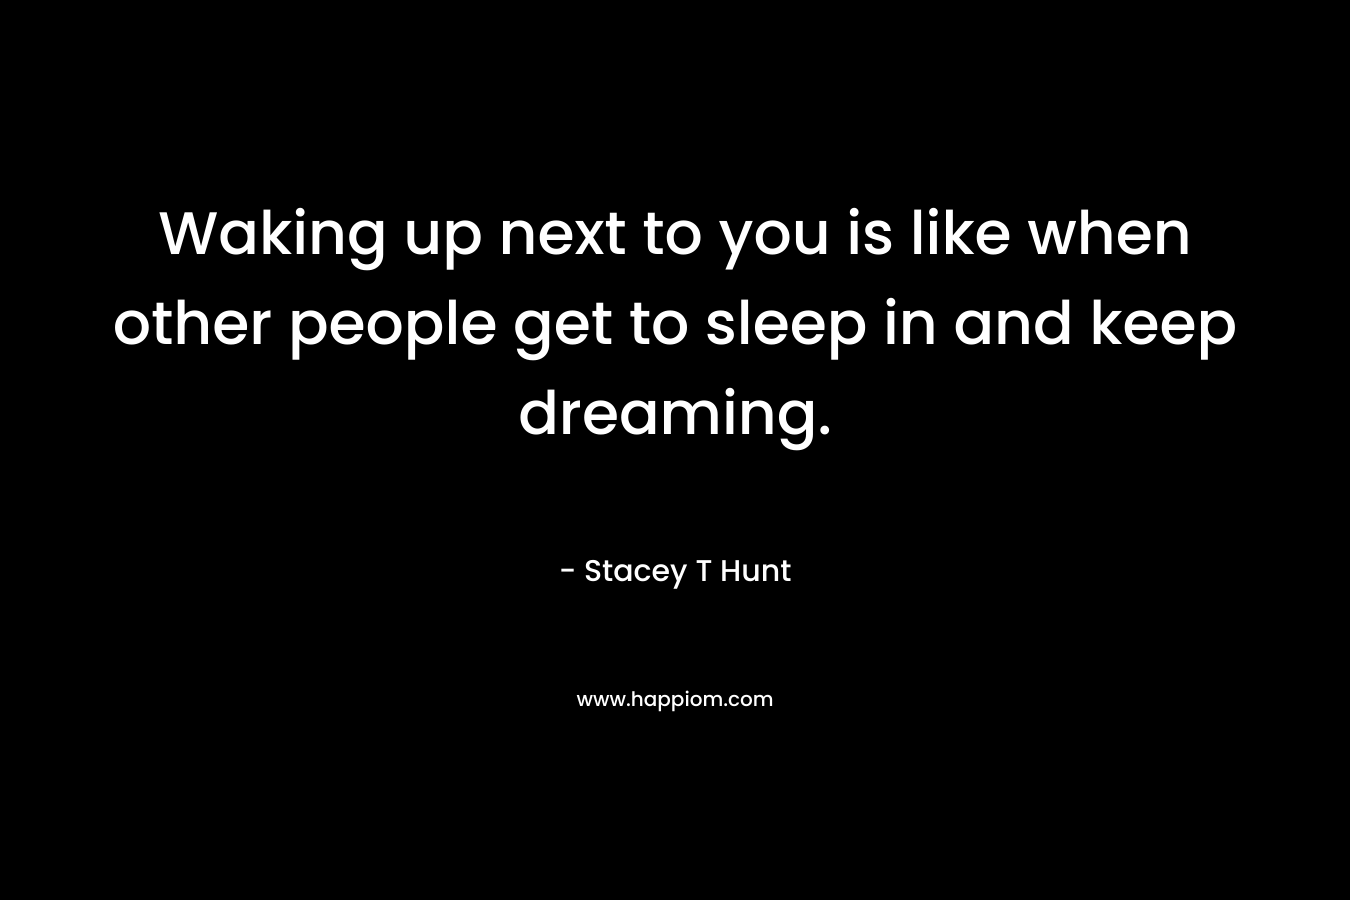 Waking up next to you is like when other people get to sleep in and keep dreaming. – Stacey T Hunt